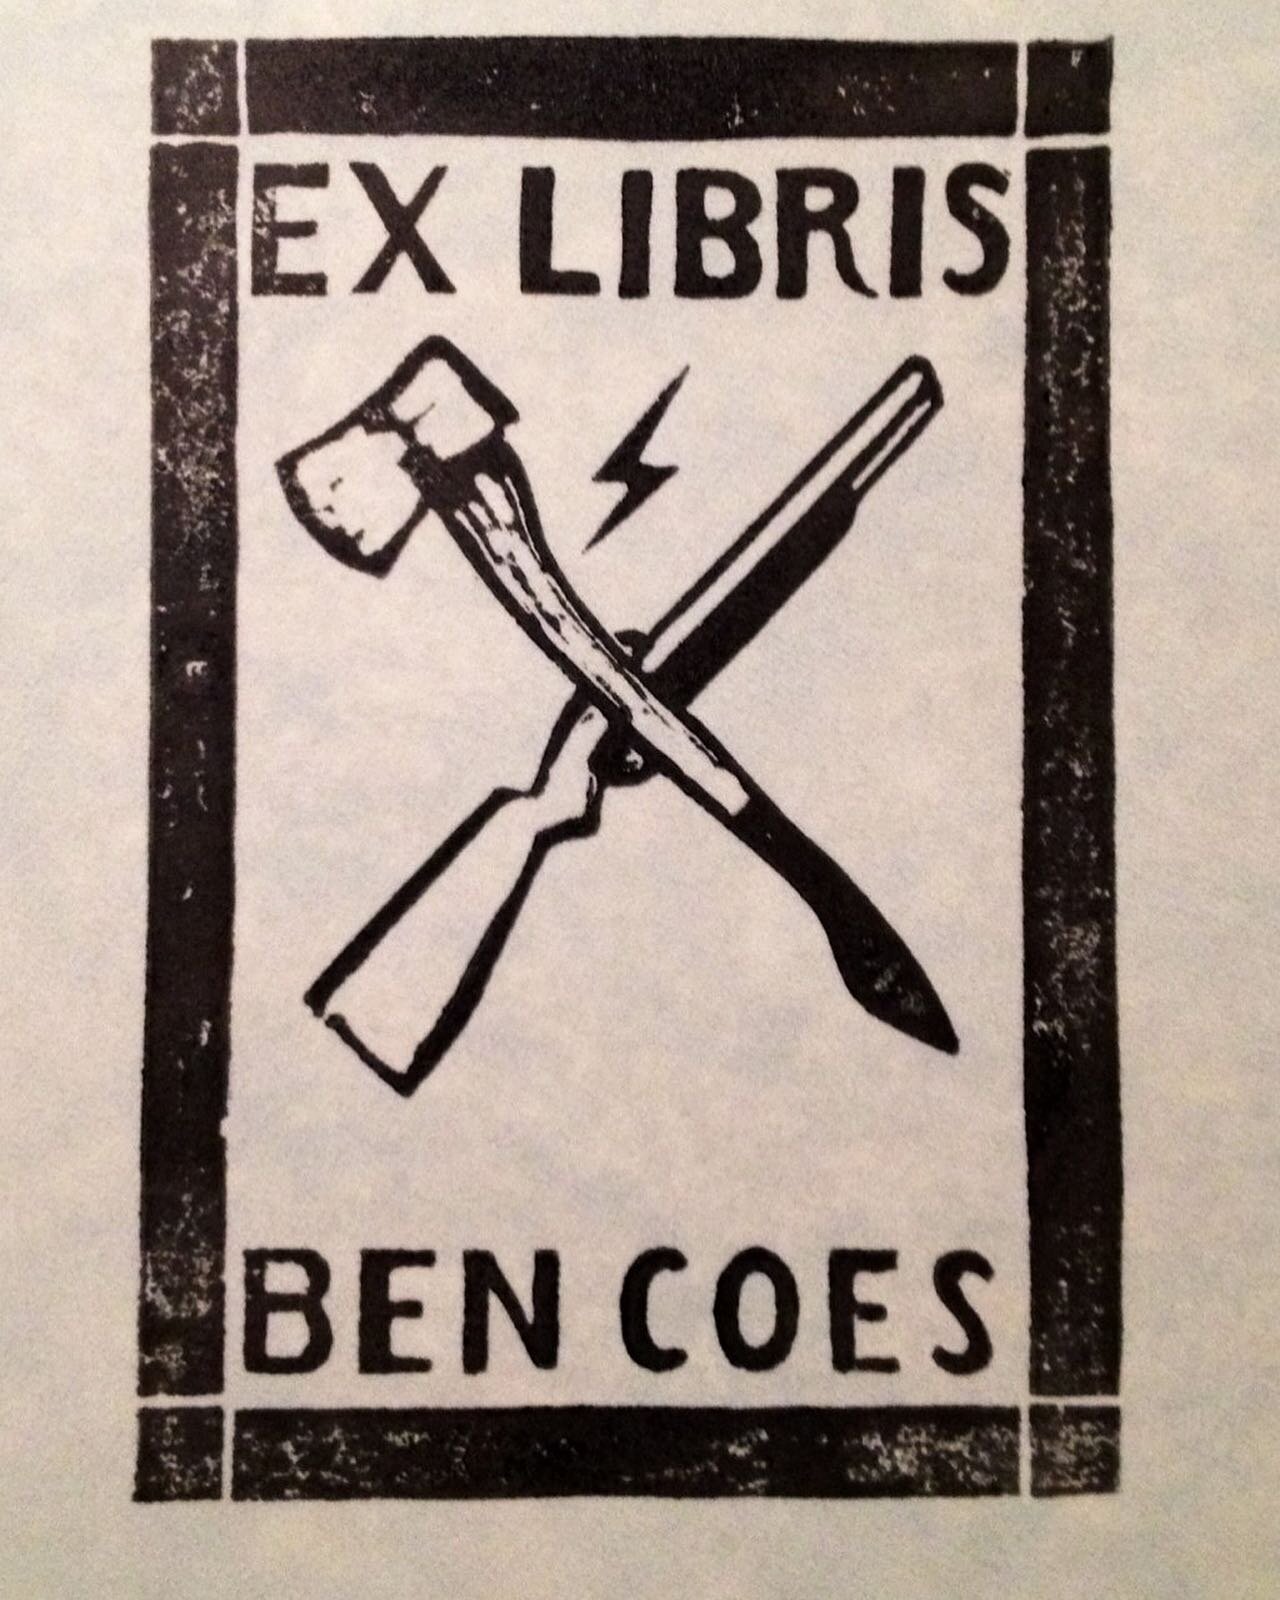 Would you like a signed and personalized bookplate to go inside one of my books? 

Send a SASE to:
Ben Coes
396 Washington Street
Suite 375
Wellesley, MA 02481

Please include a few thousand dollars, a blank check, and a one way ticket to Argentina, 